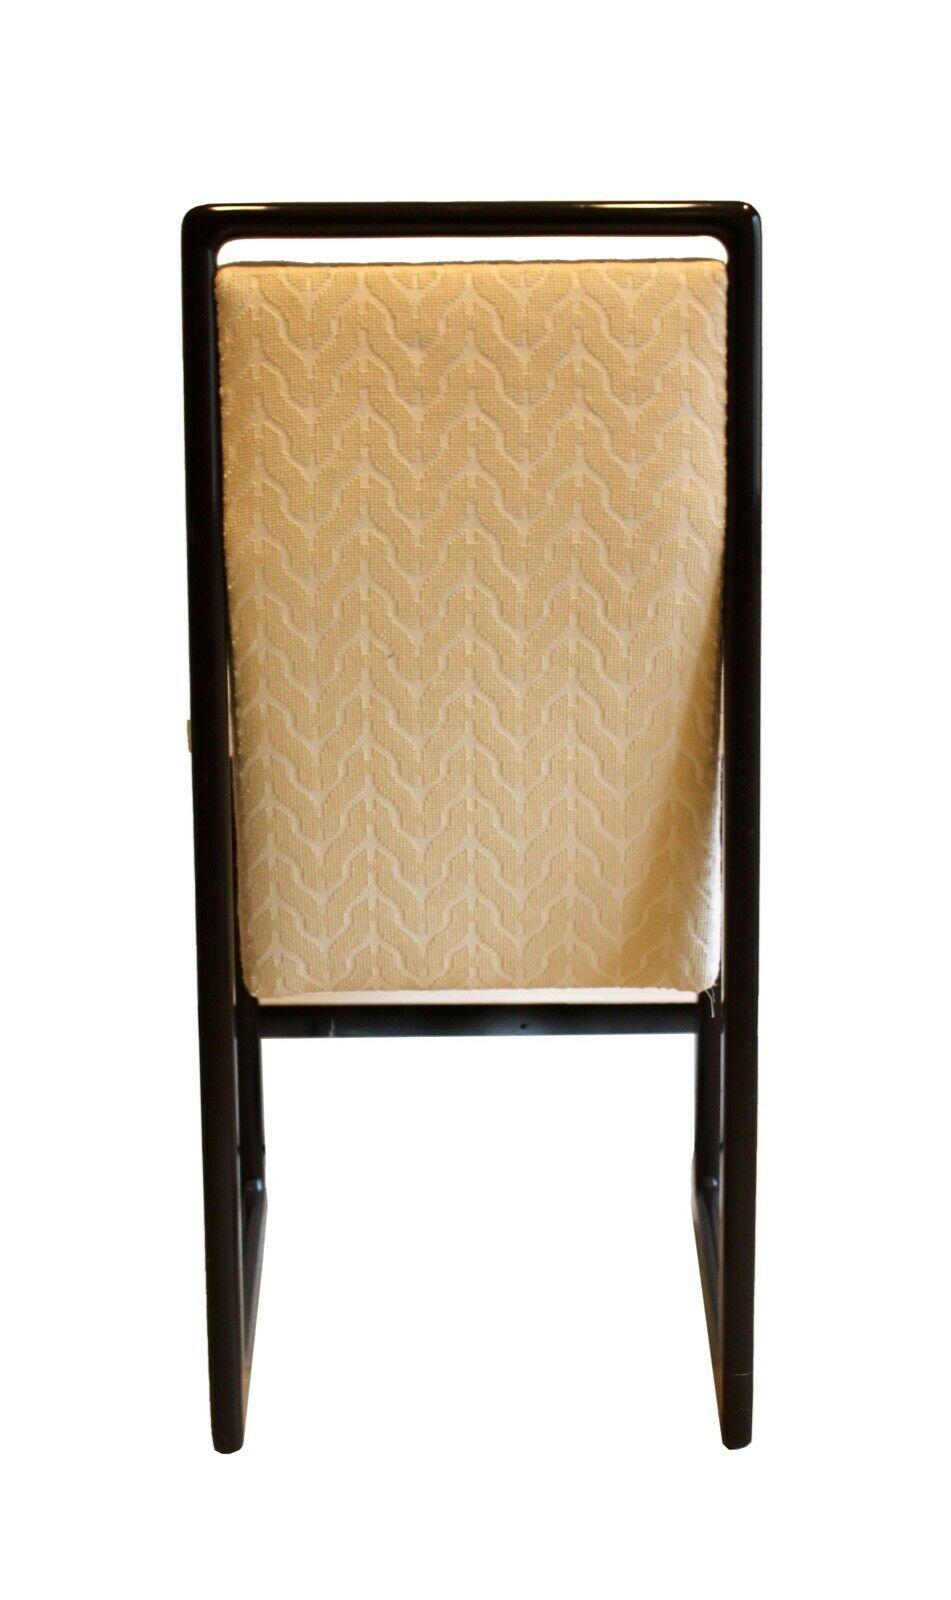 Signed by Vladimir Kagan, this set of postmodern dining chairs are designed in classical, cubist style with dark wood frames surrounding two arm chairs and six side chairs. Neutral upholstery covers both the seat and back making these the perfect